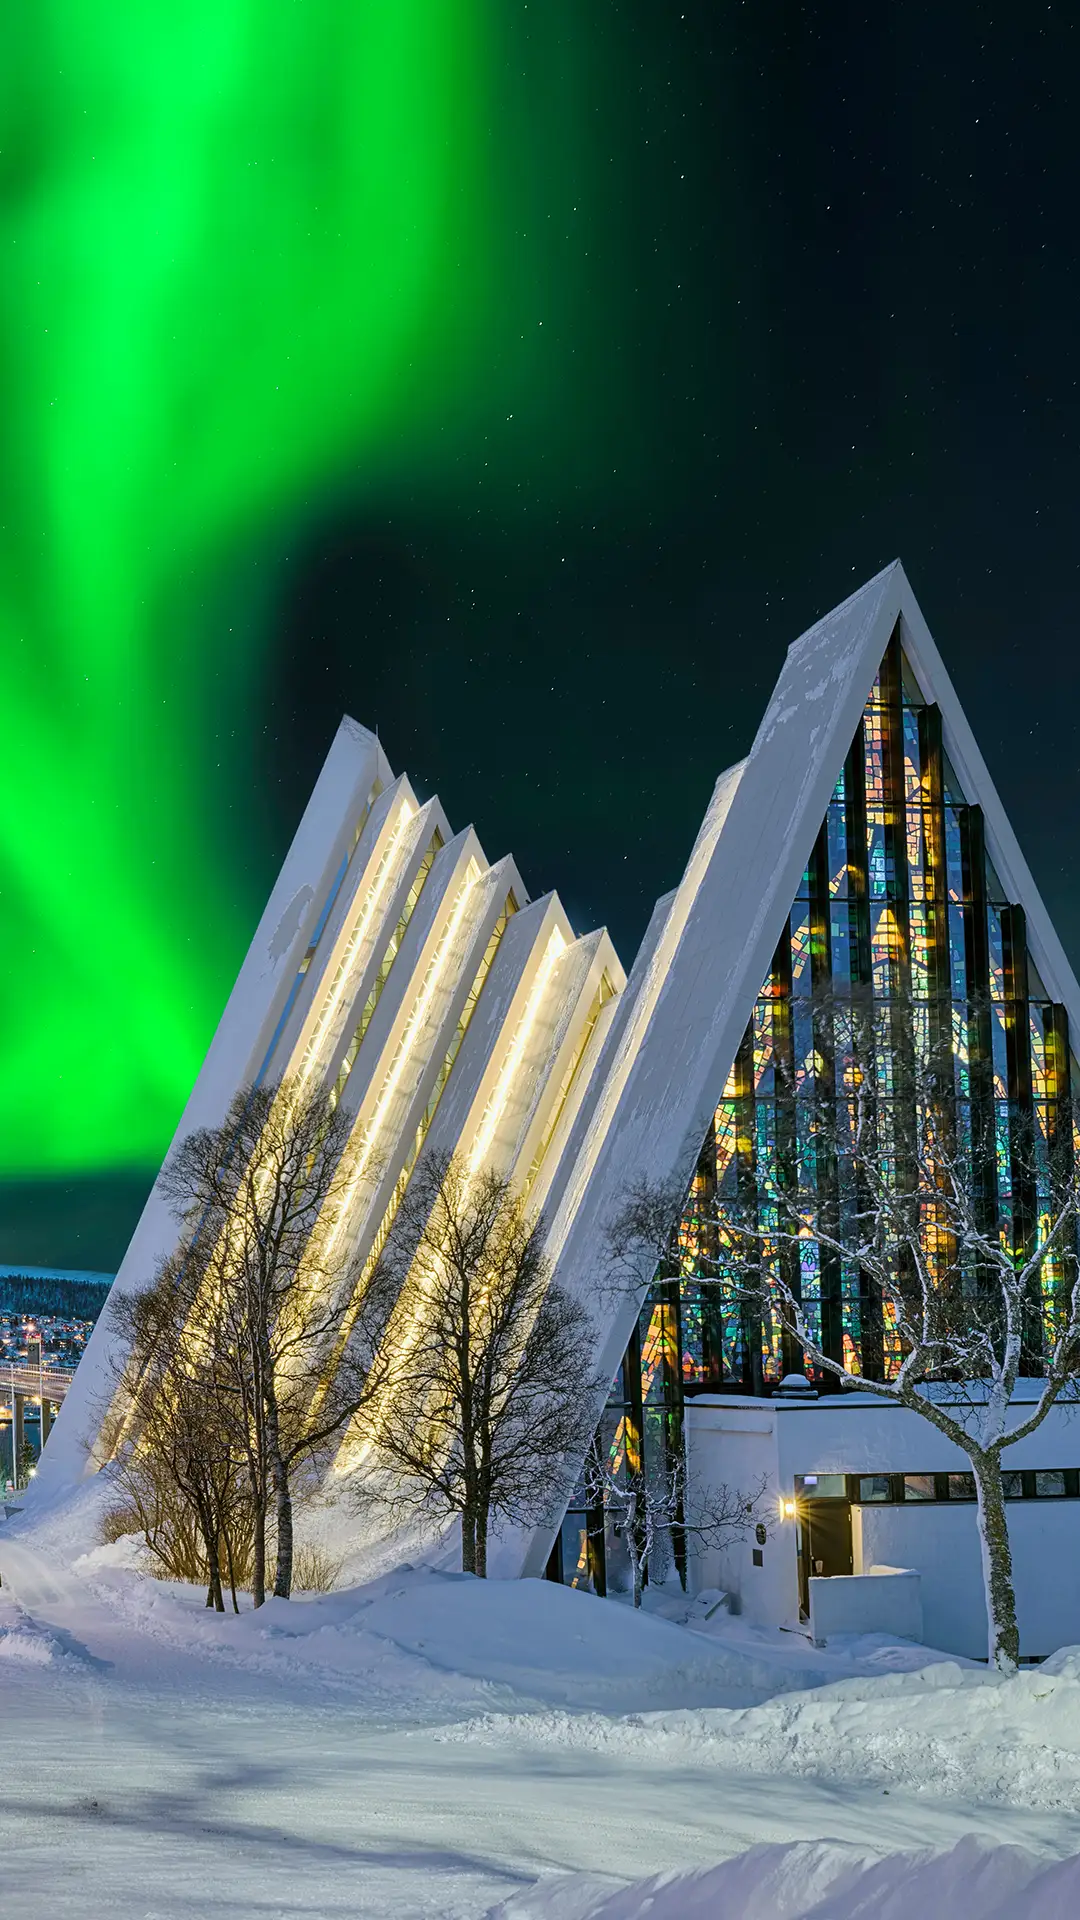 Arctic Cathedral in Tromso at night with aurora borealis in the sky.